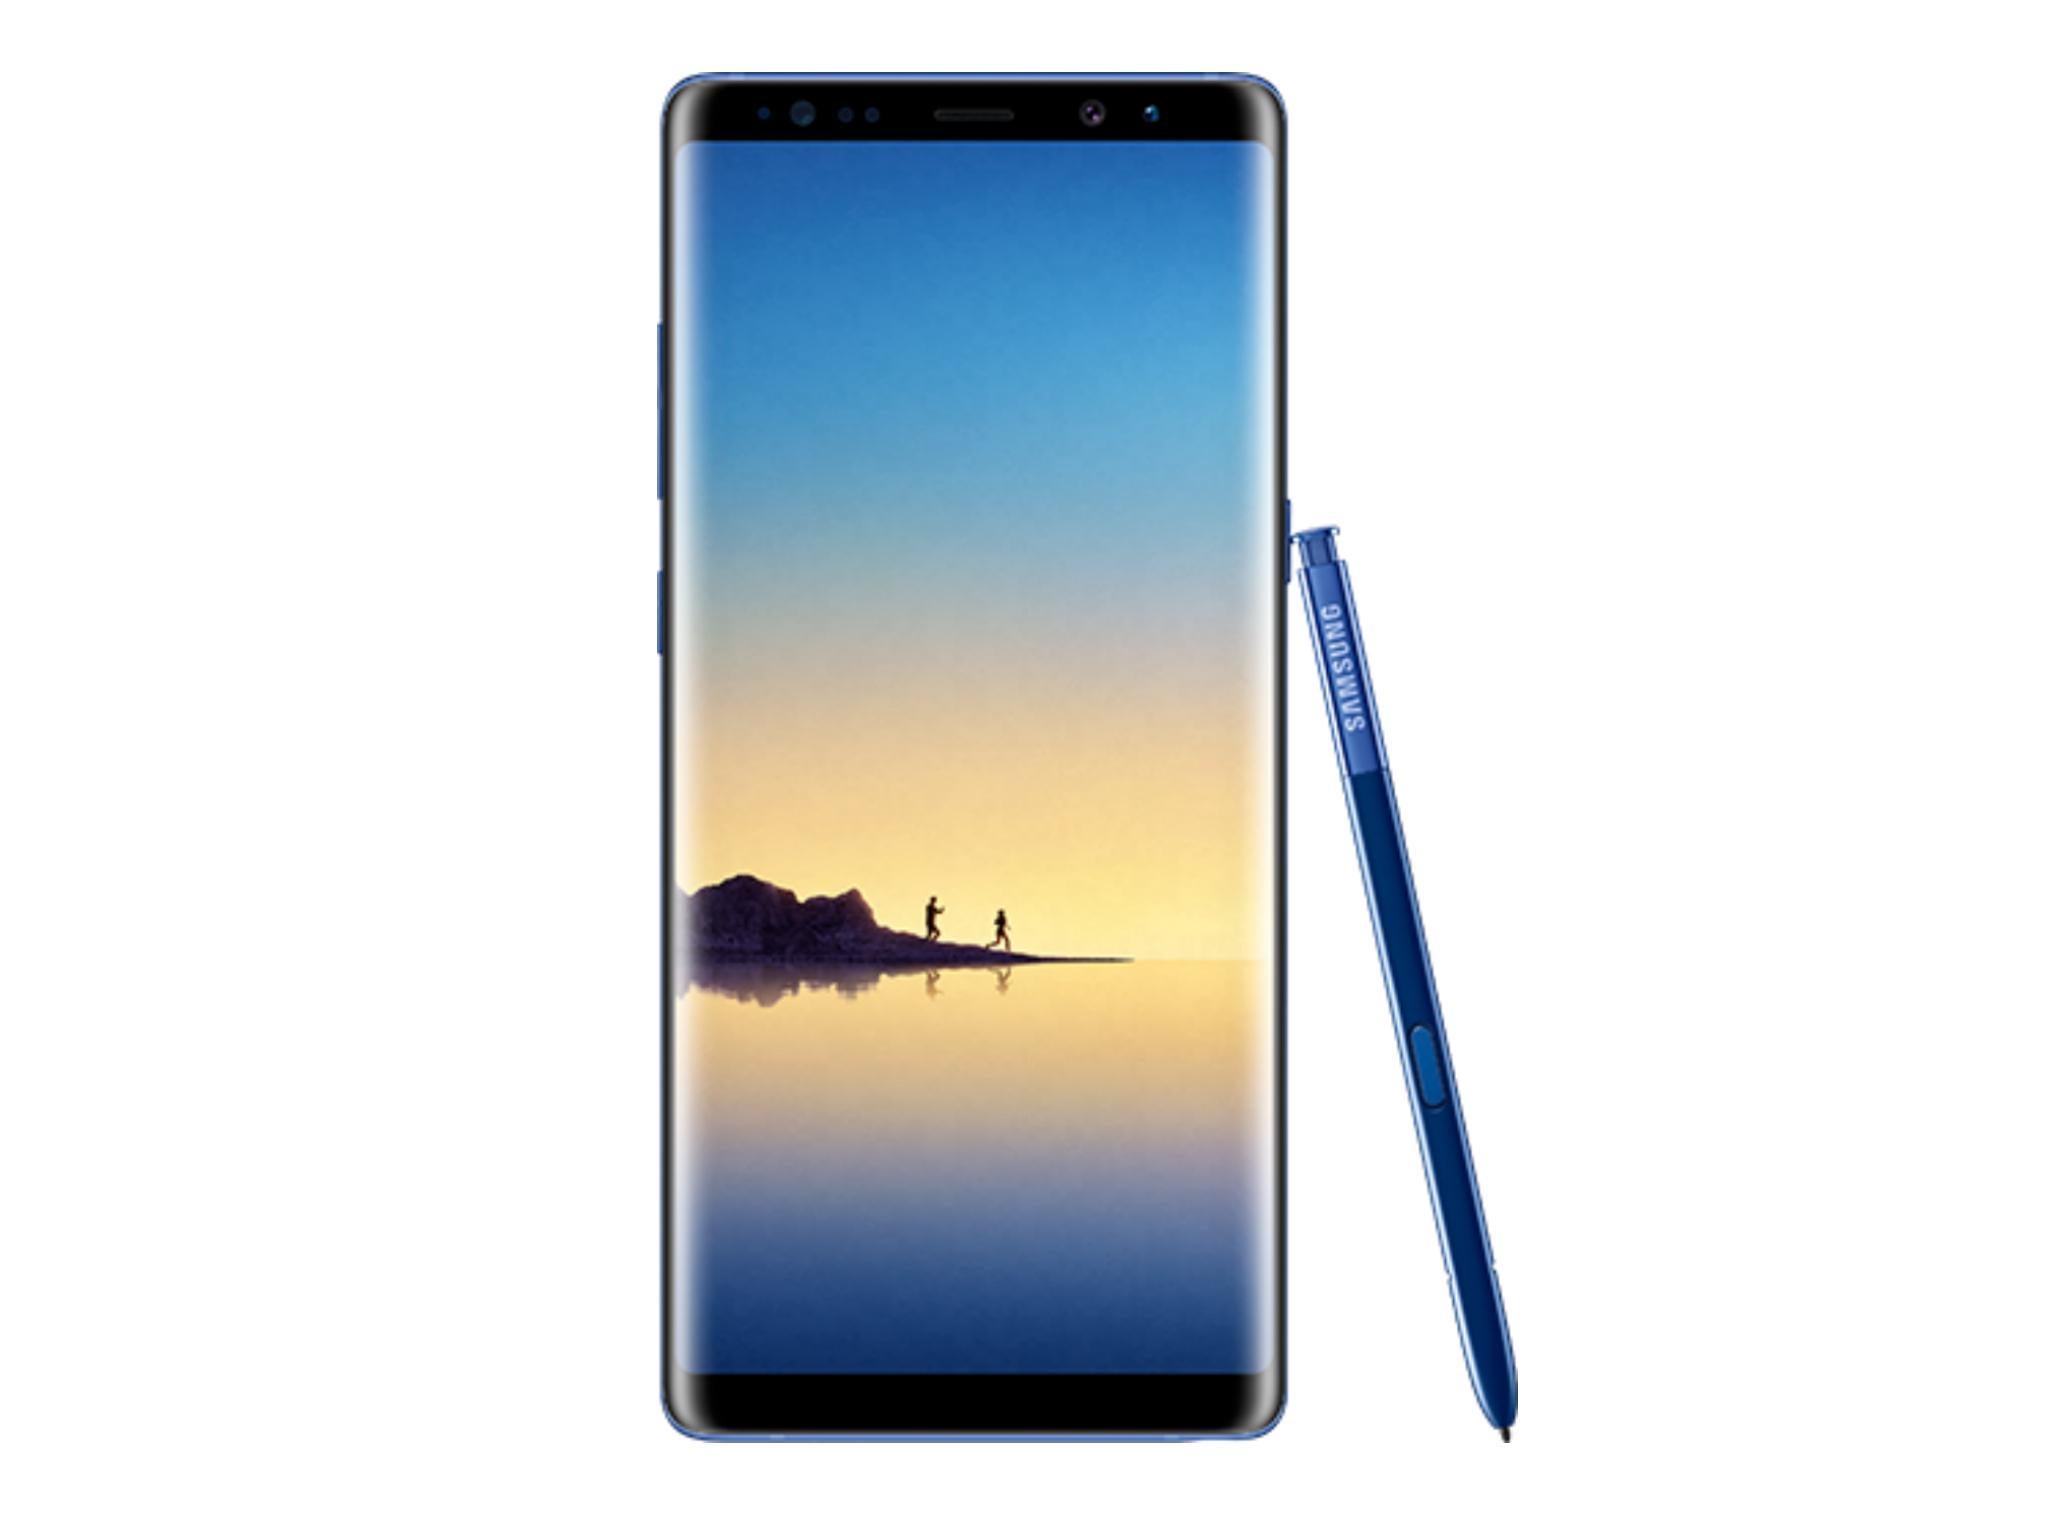 Numerous leaks over recent weeks have revealed almost every detail about the Galaxy Note 8